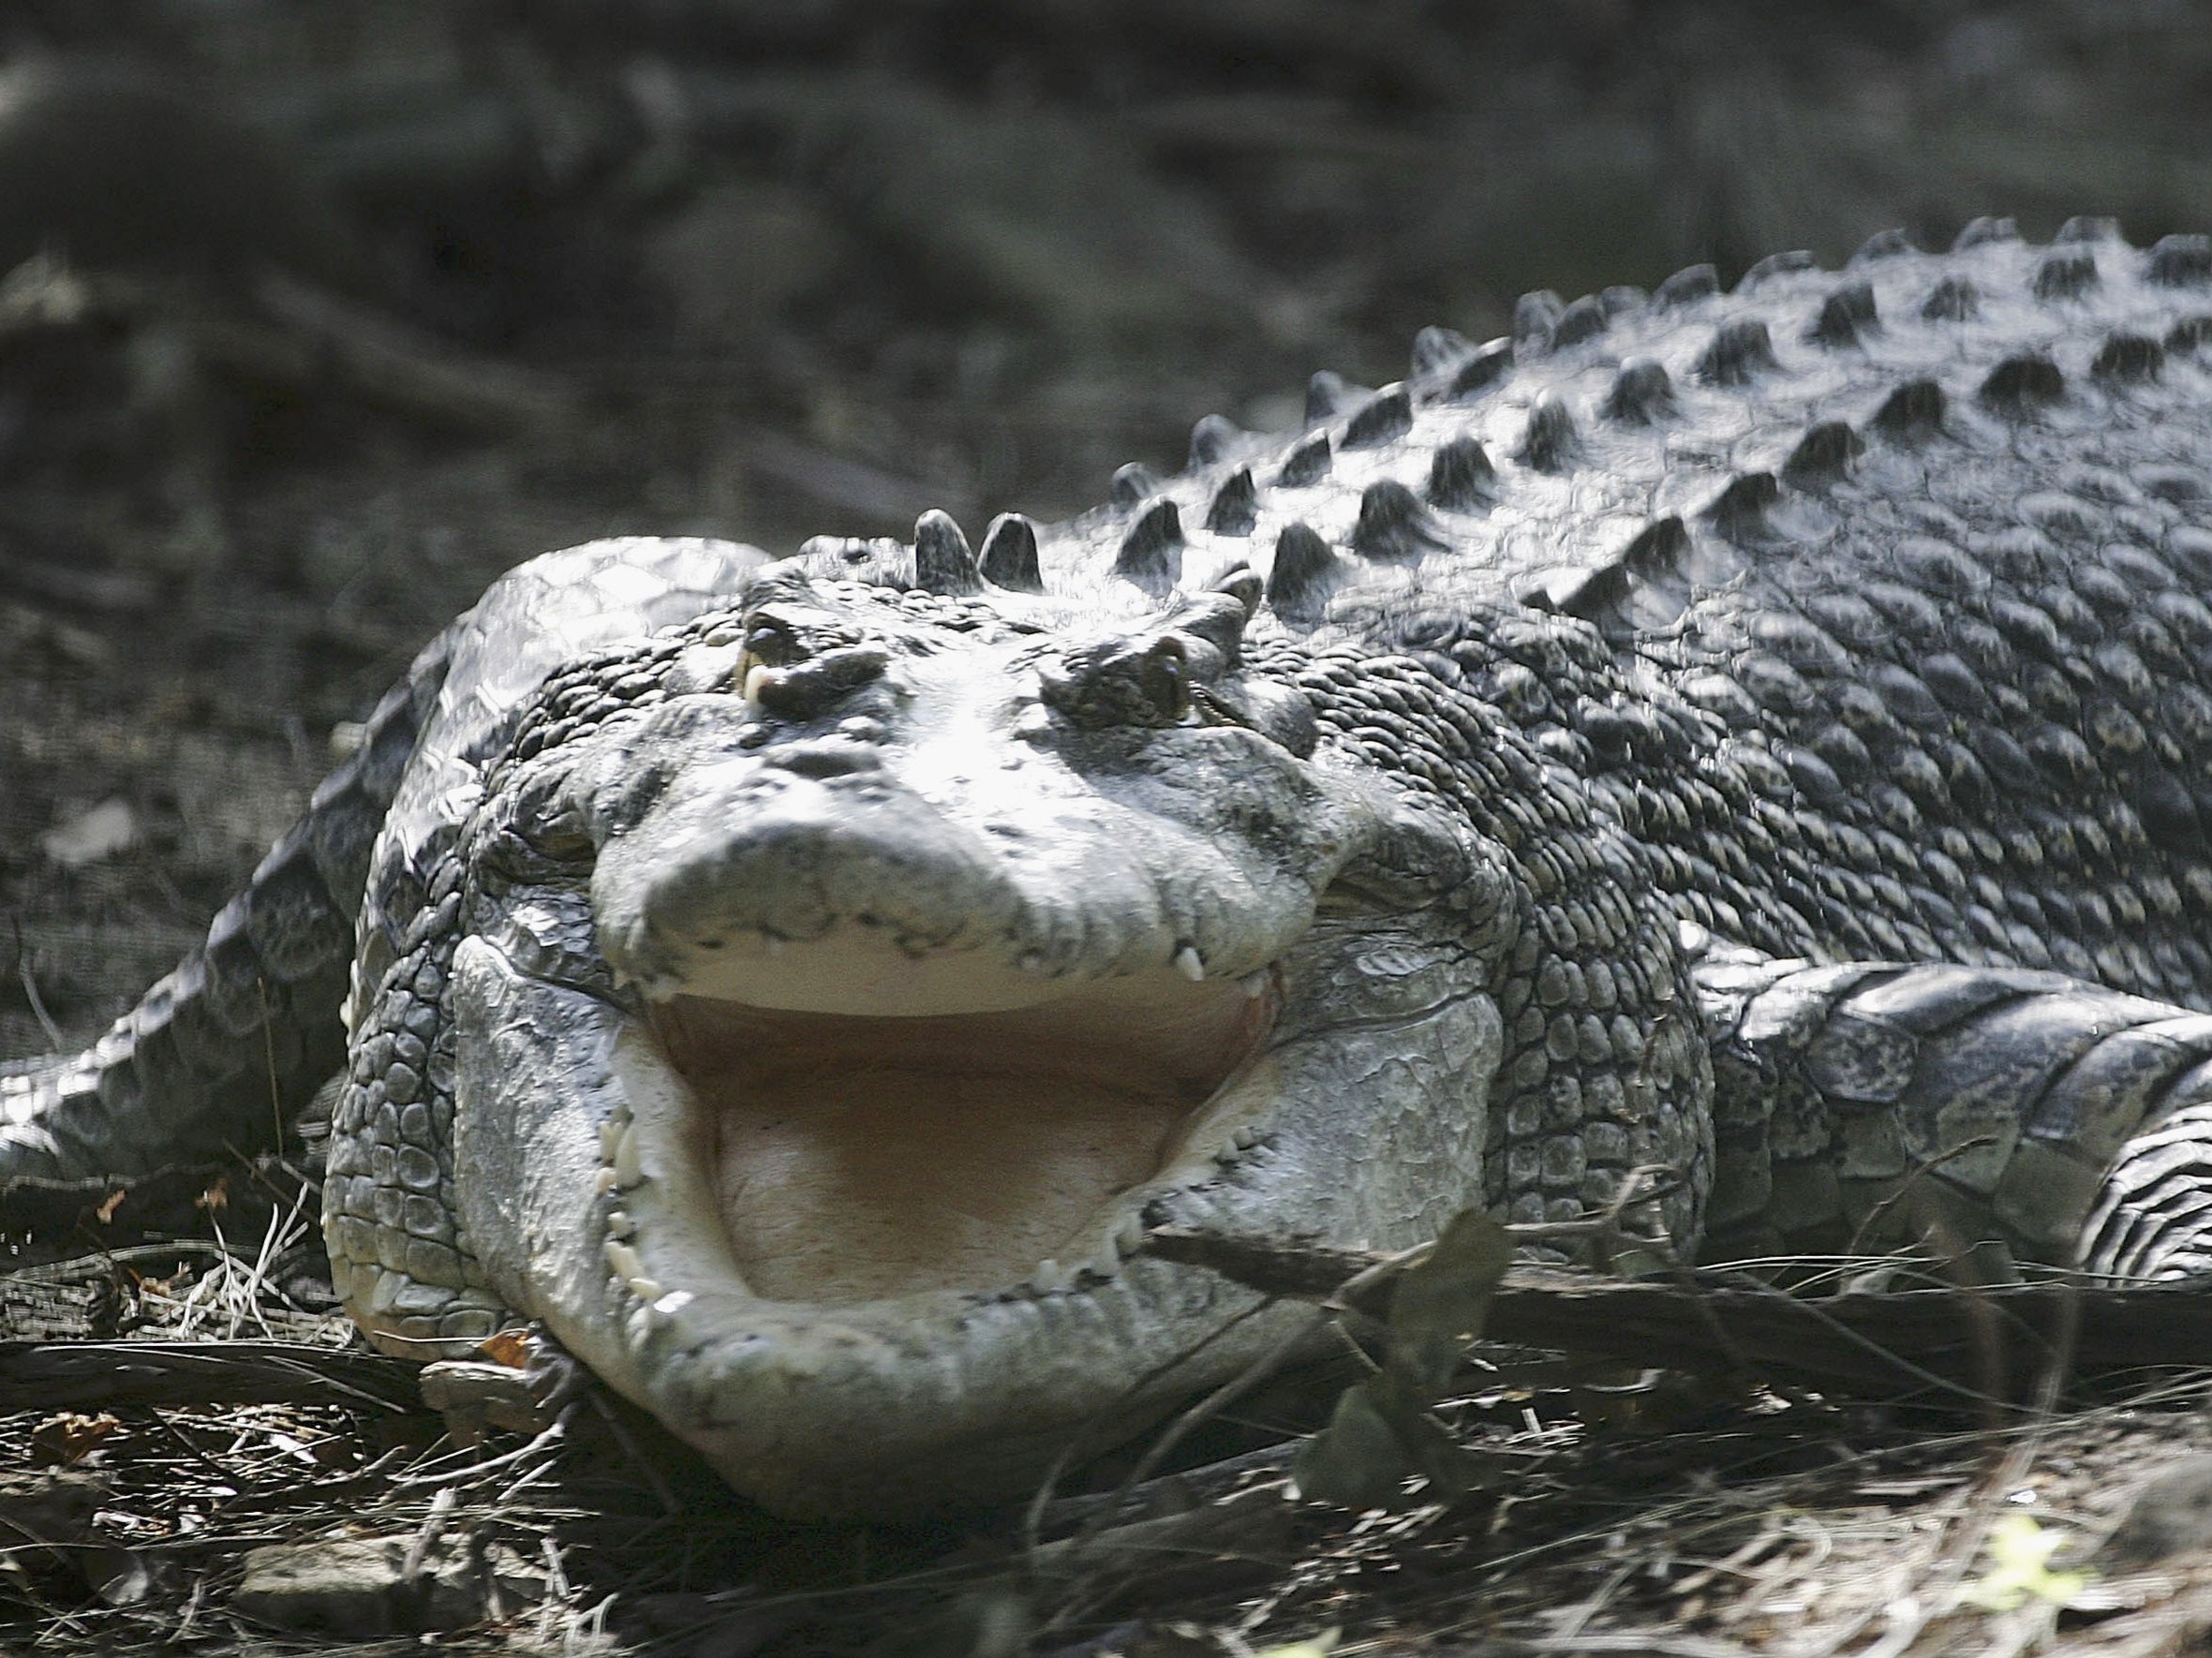 A 35-year-old female Saltwater Crocodile, Australia’s most dangerous predator, is exhibited at Sydney’s Taronga Zoo